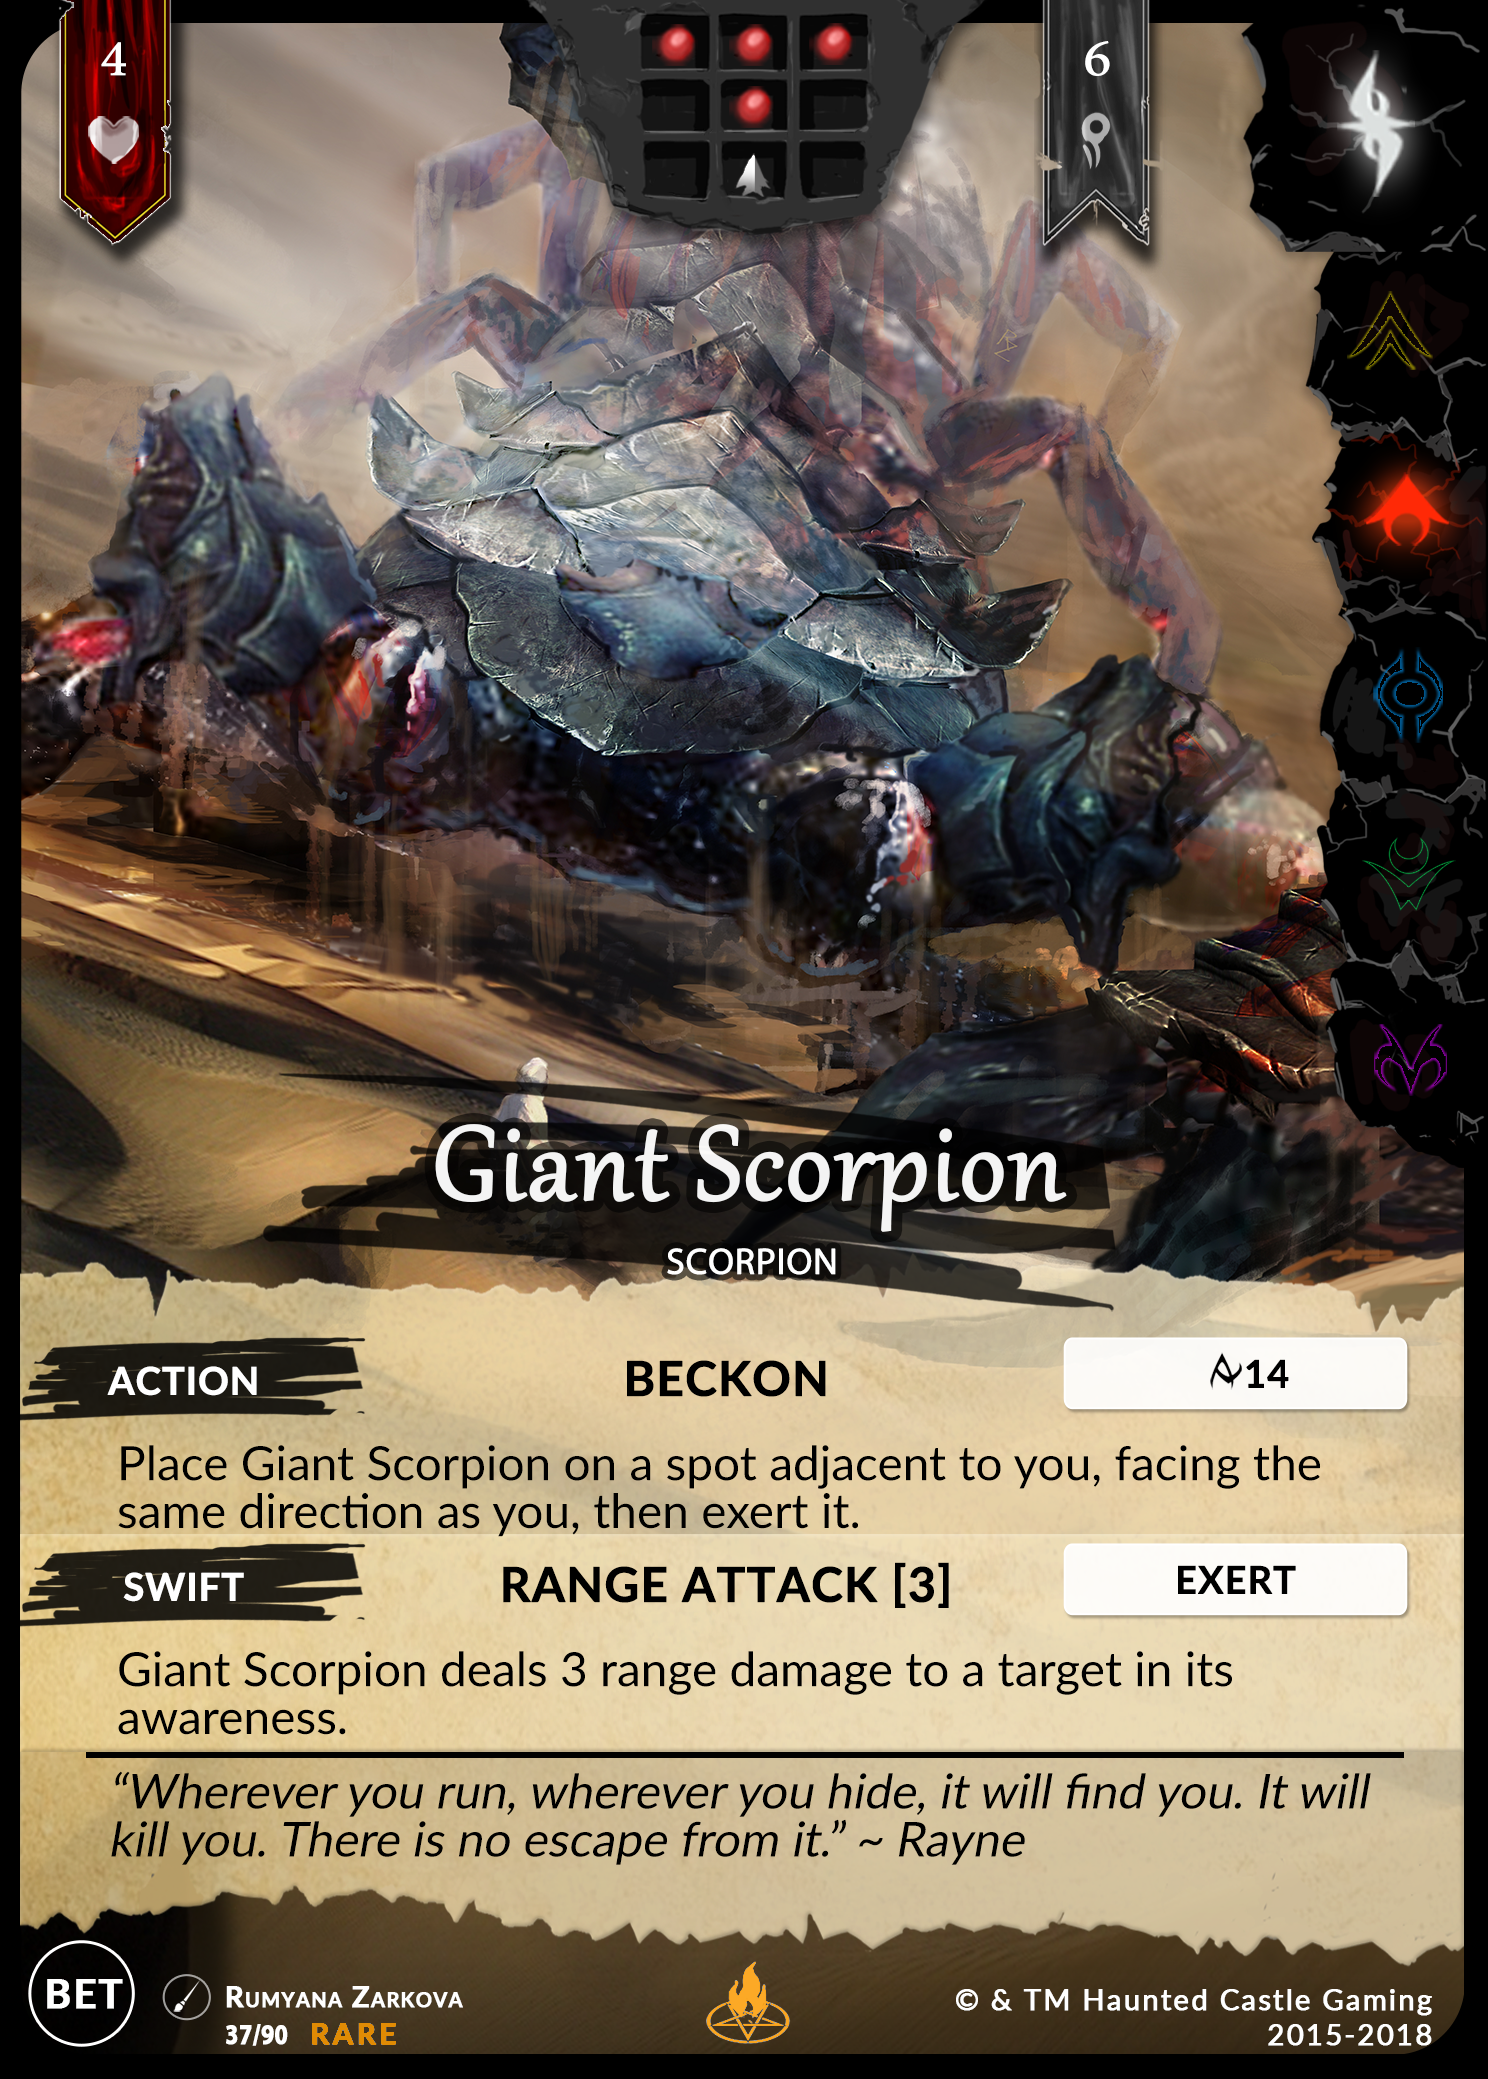 Giant Scorpion (Beta, 37/90) | North of Exile Games